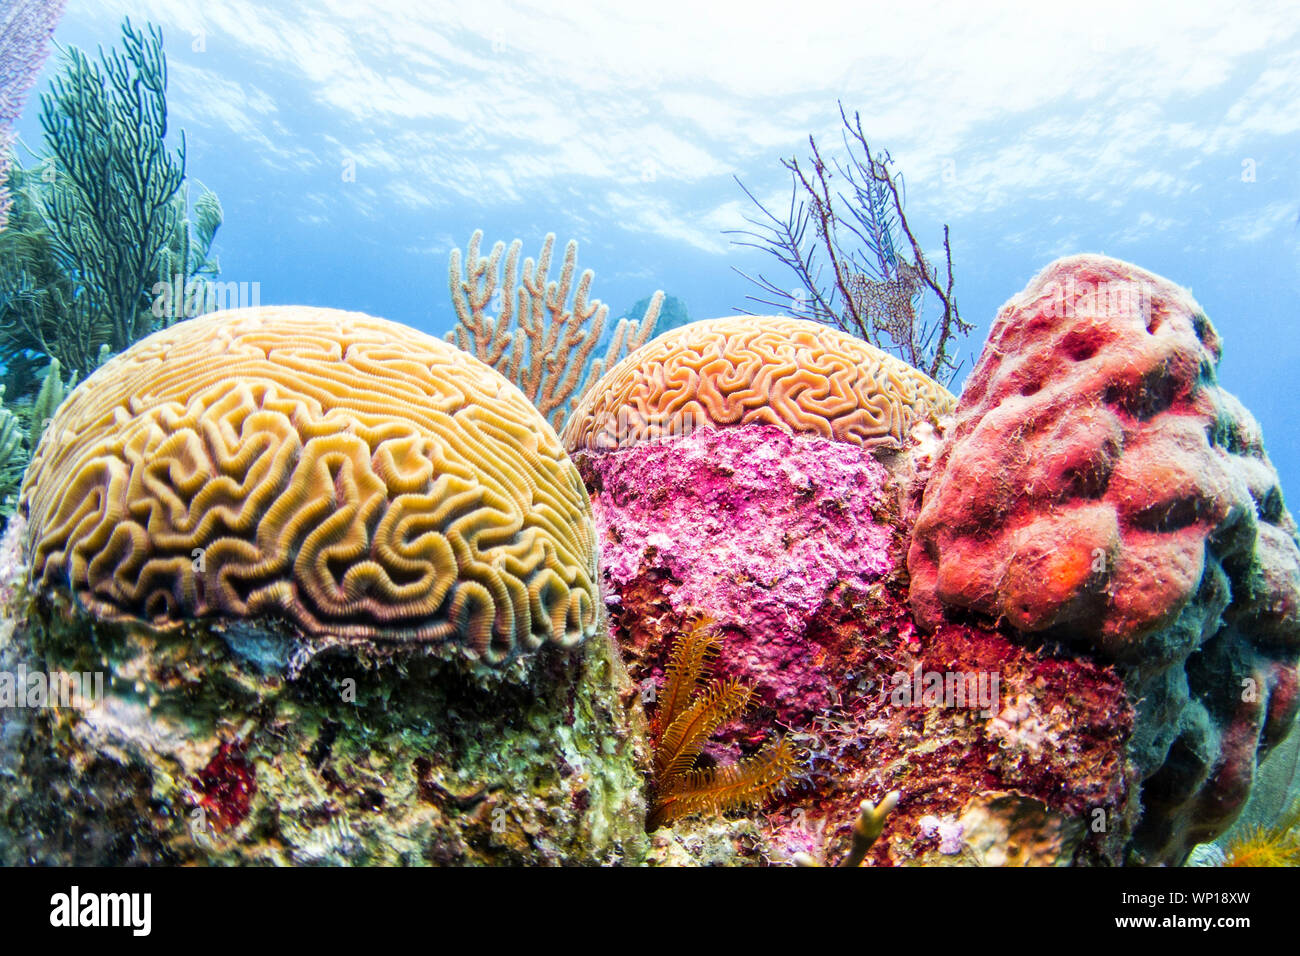 Coral Reef, Belize - Colorful Barrier Reef Stock Photo